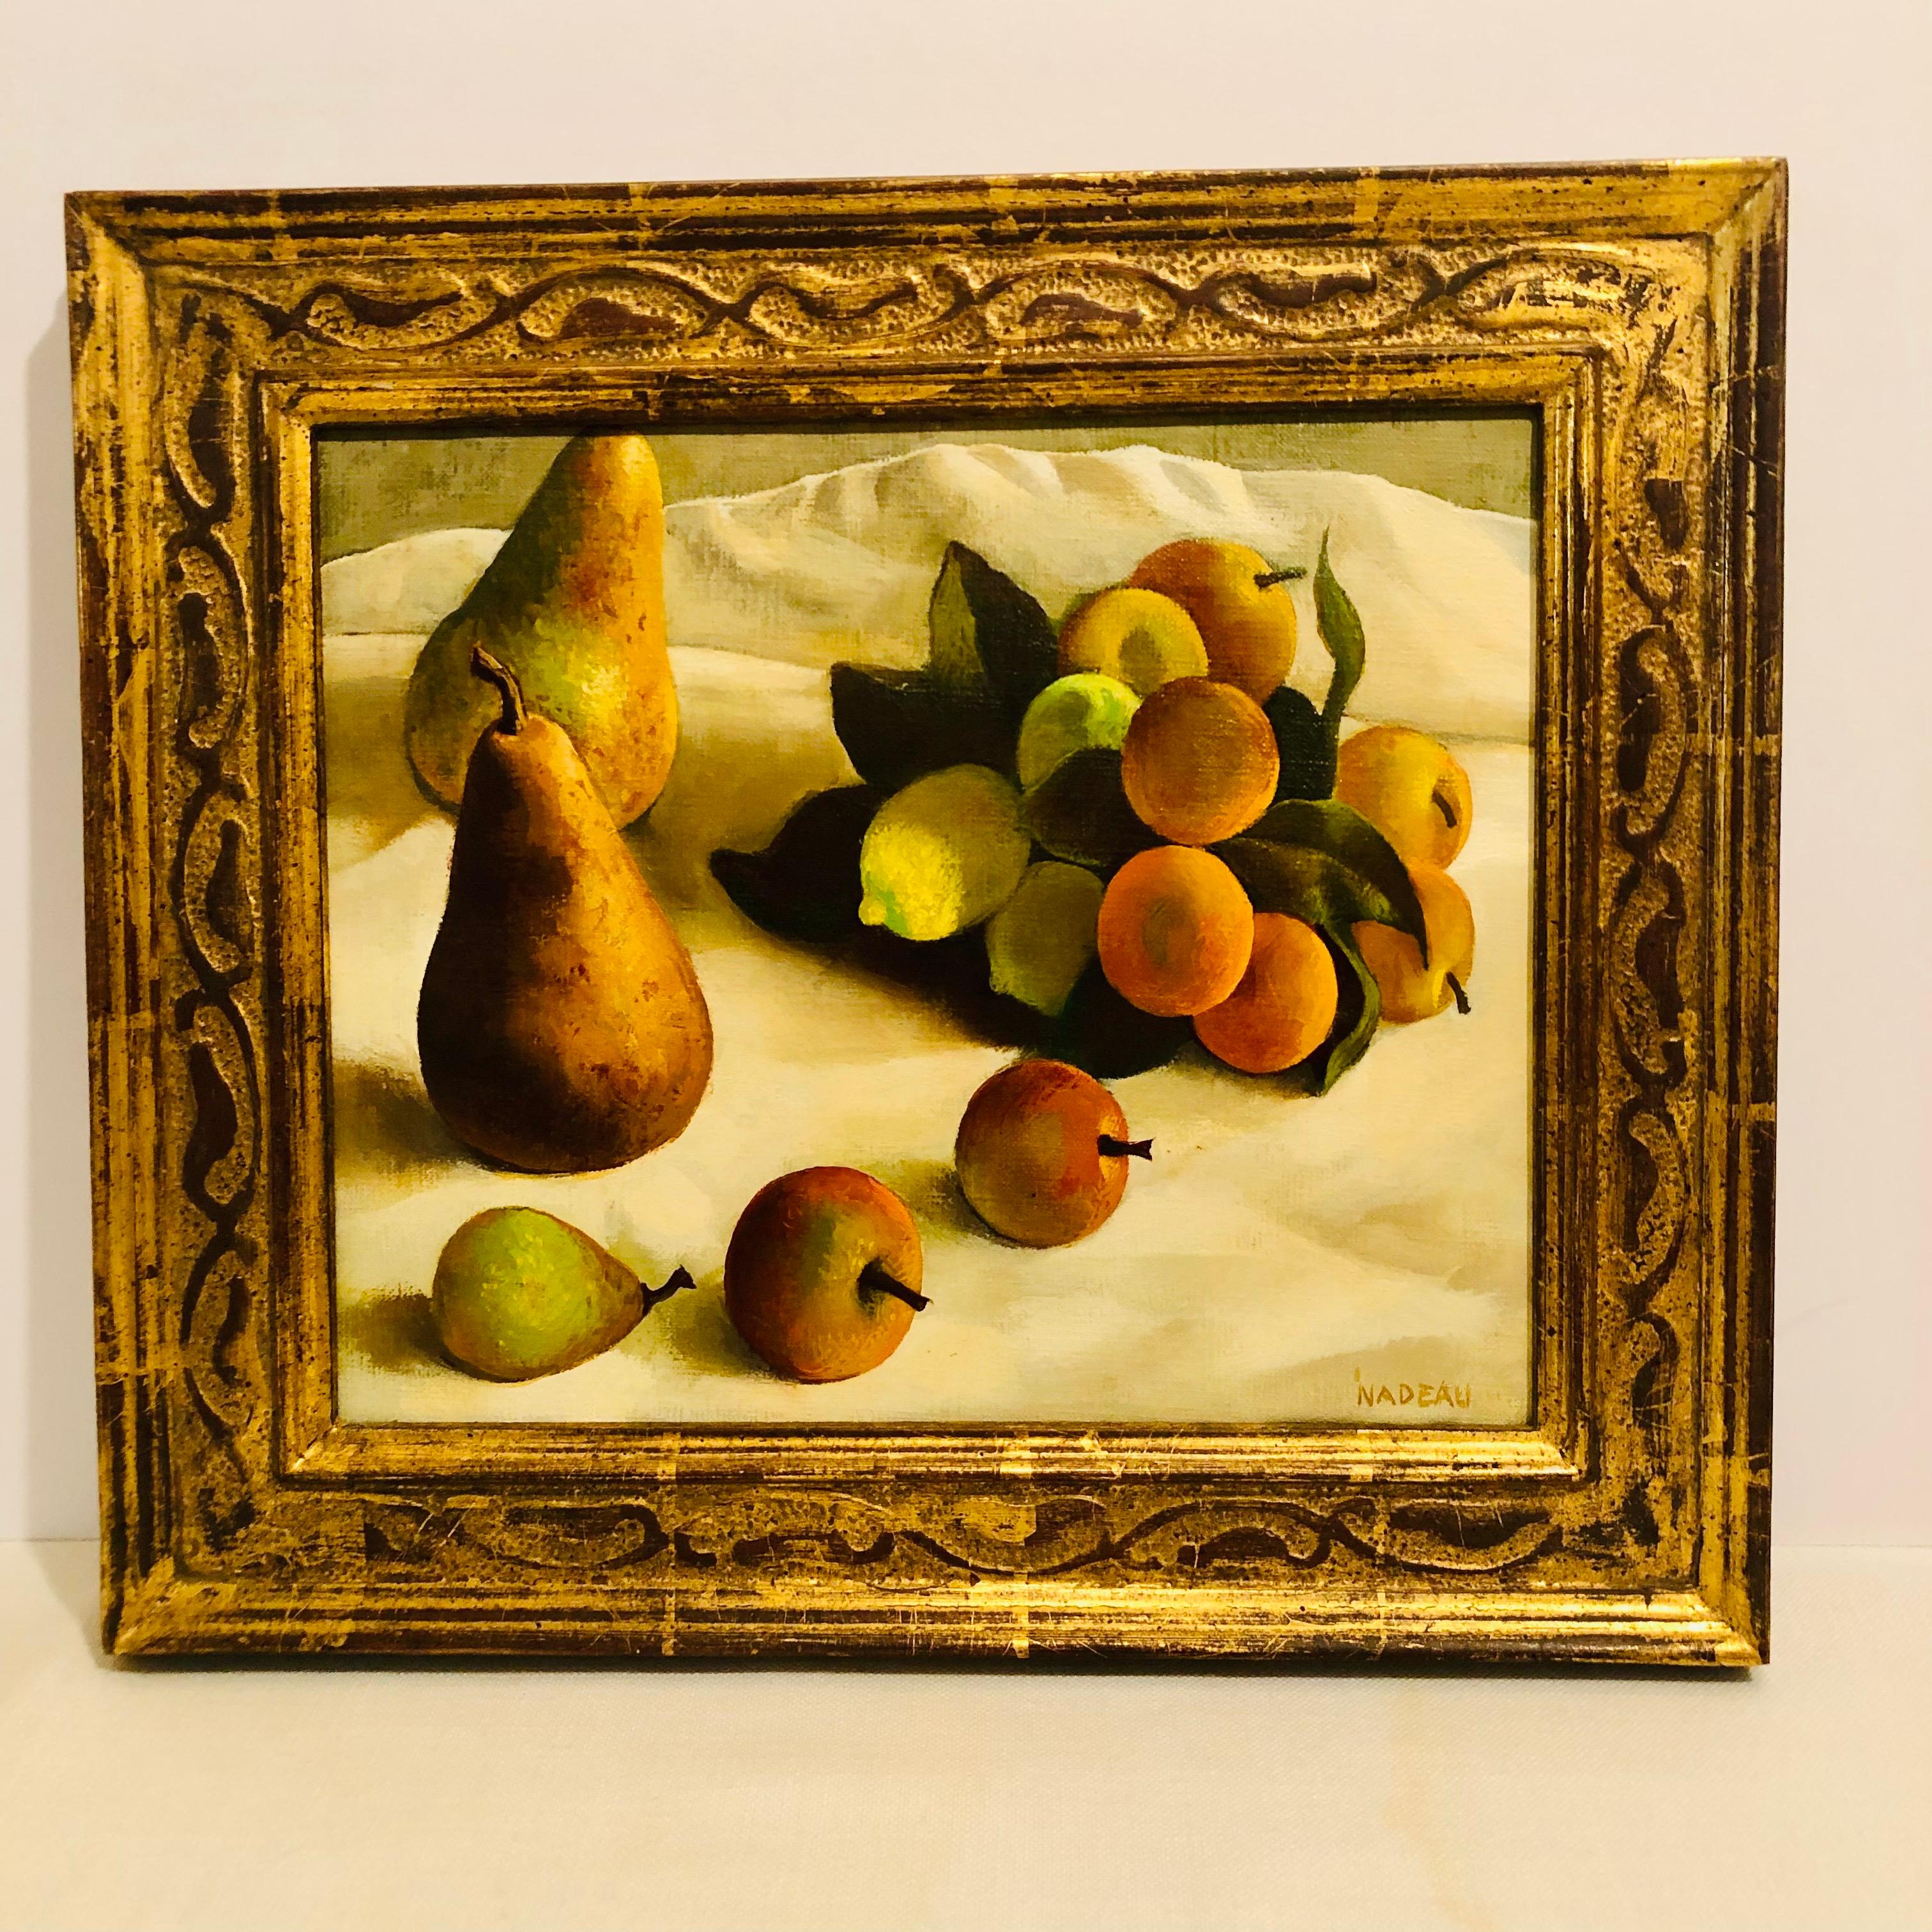 Oil on Canvas Painting of Pears and Other Fruits in a Gold Frame Signed Nadeau 2